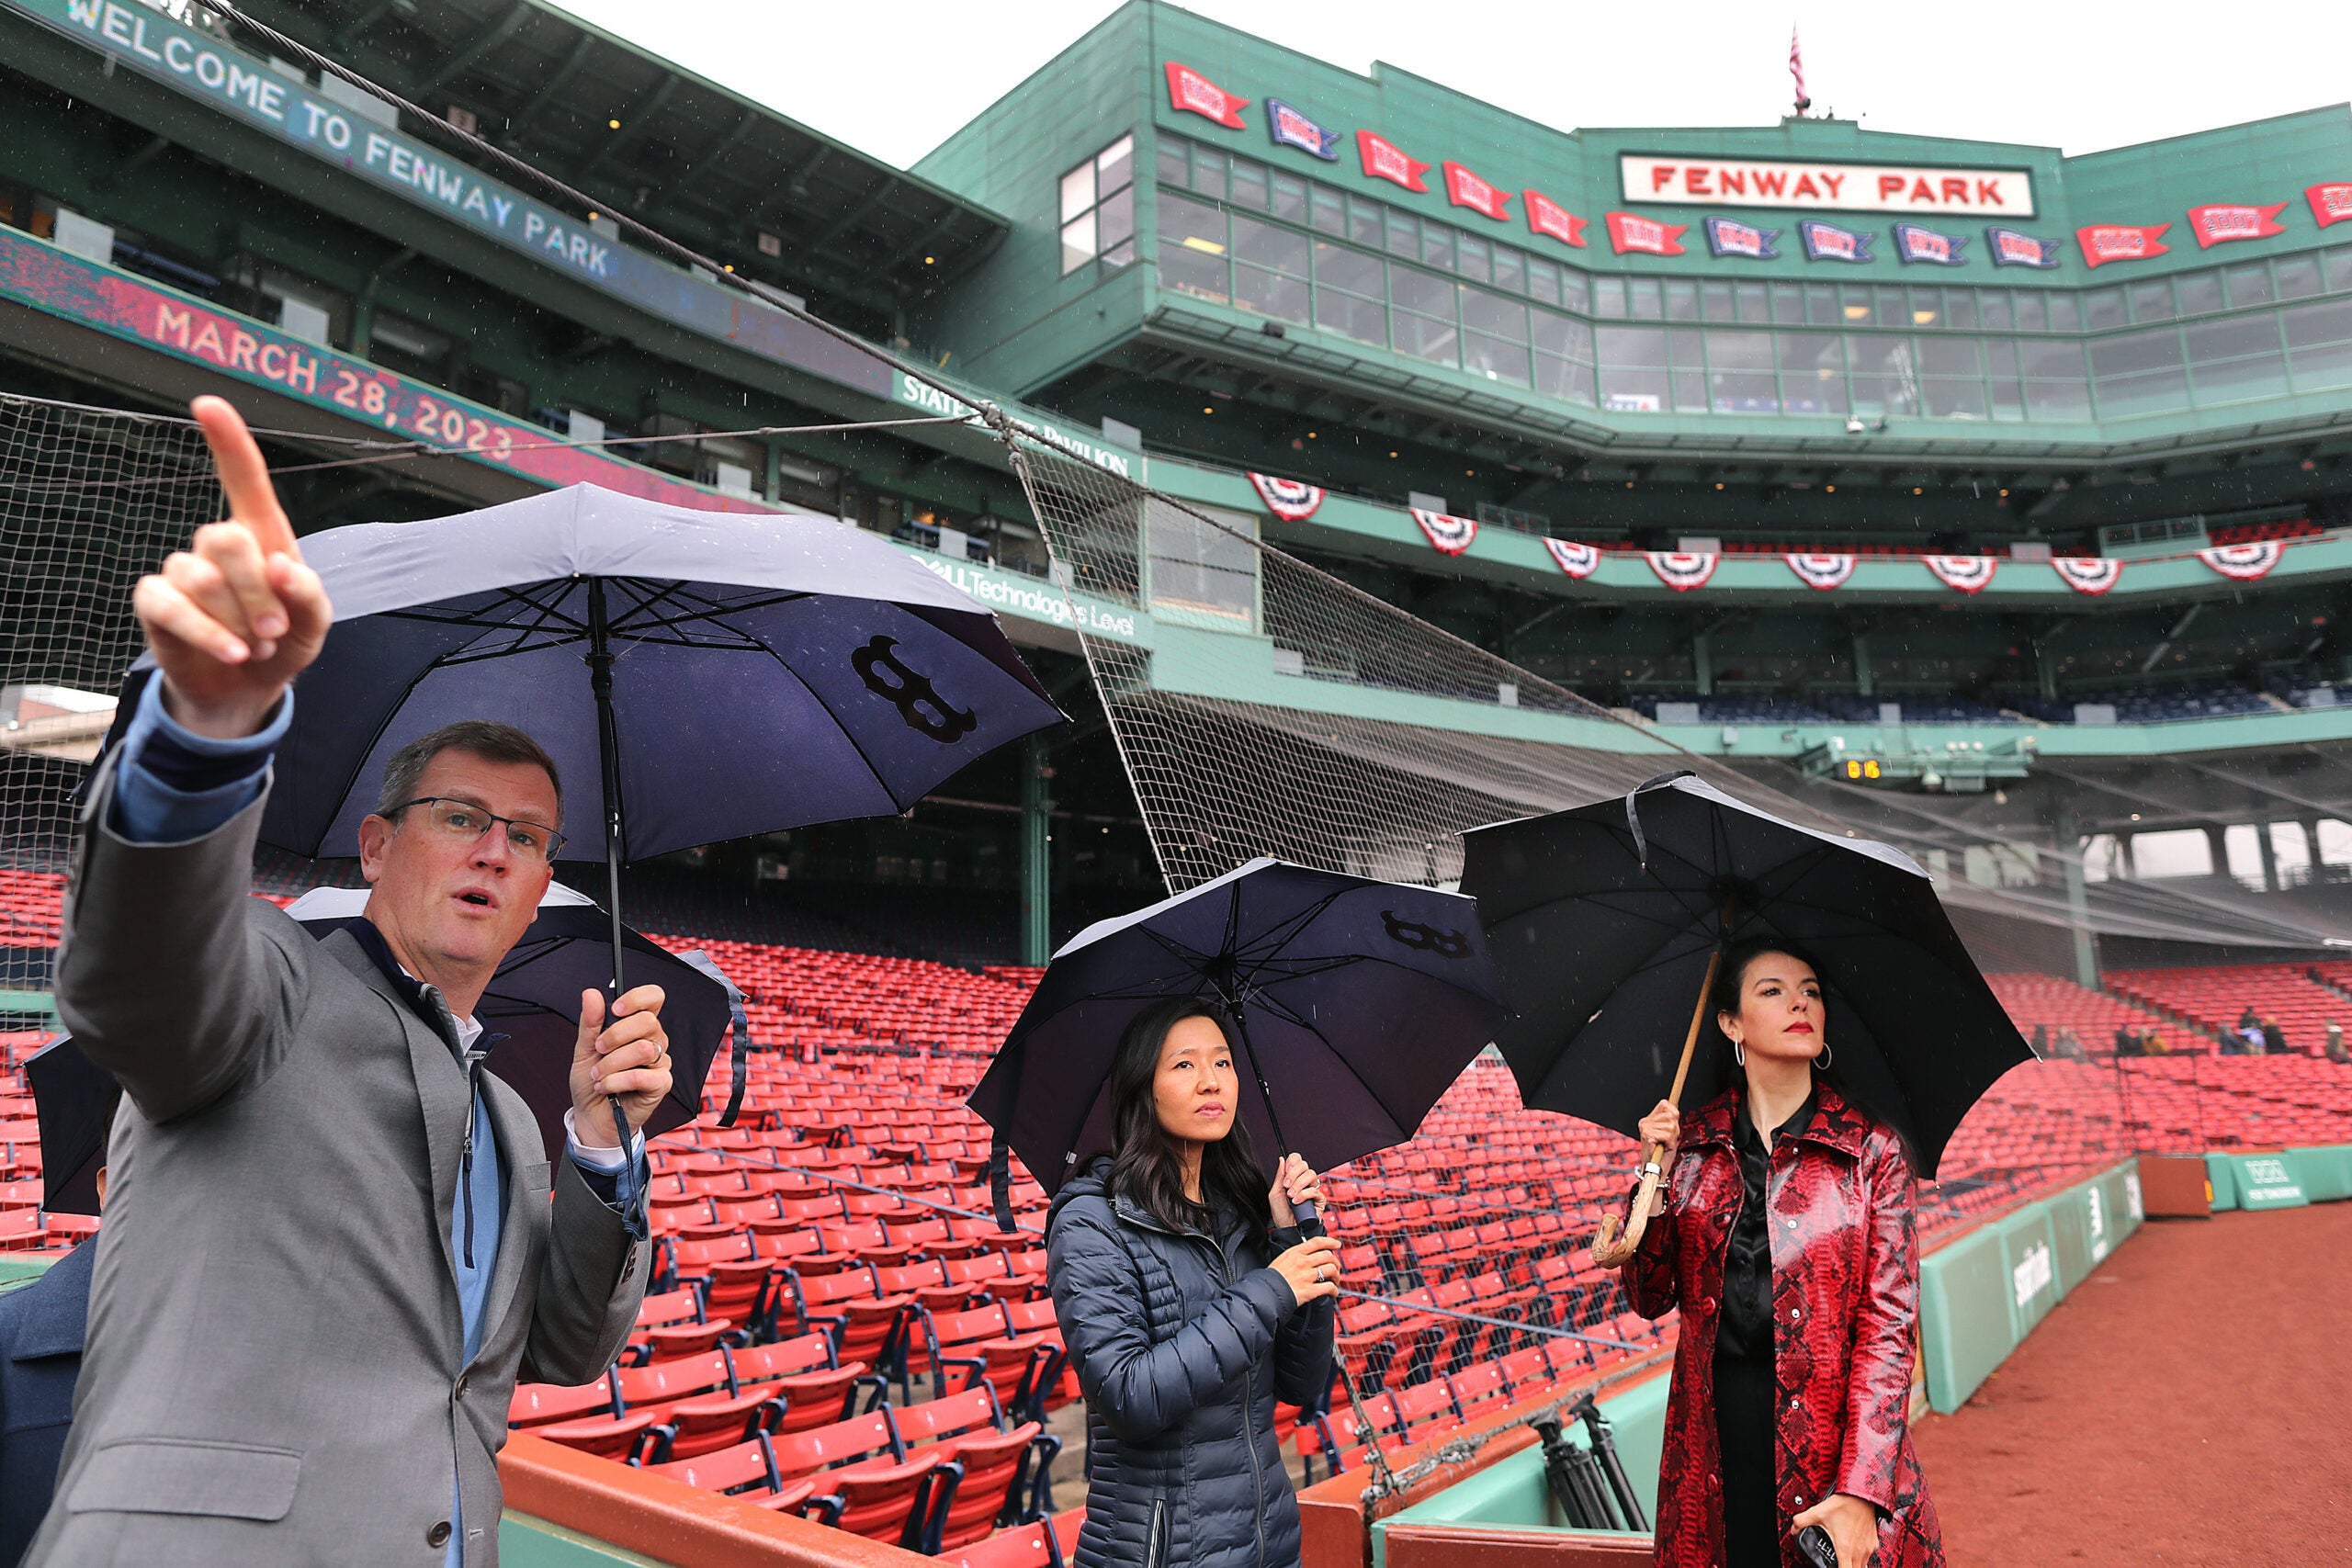 Michelle Wu visits Fenway Park to see renovations.